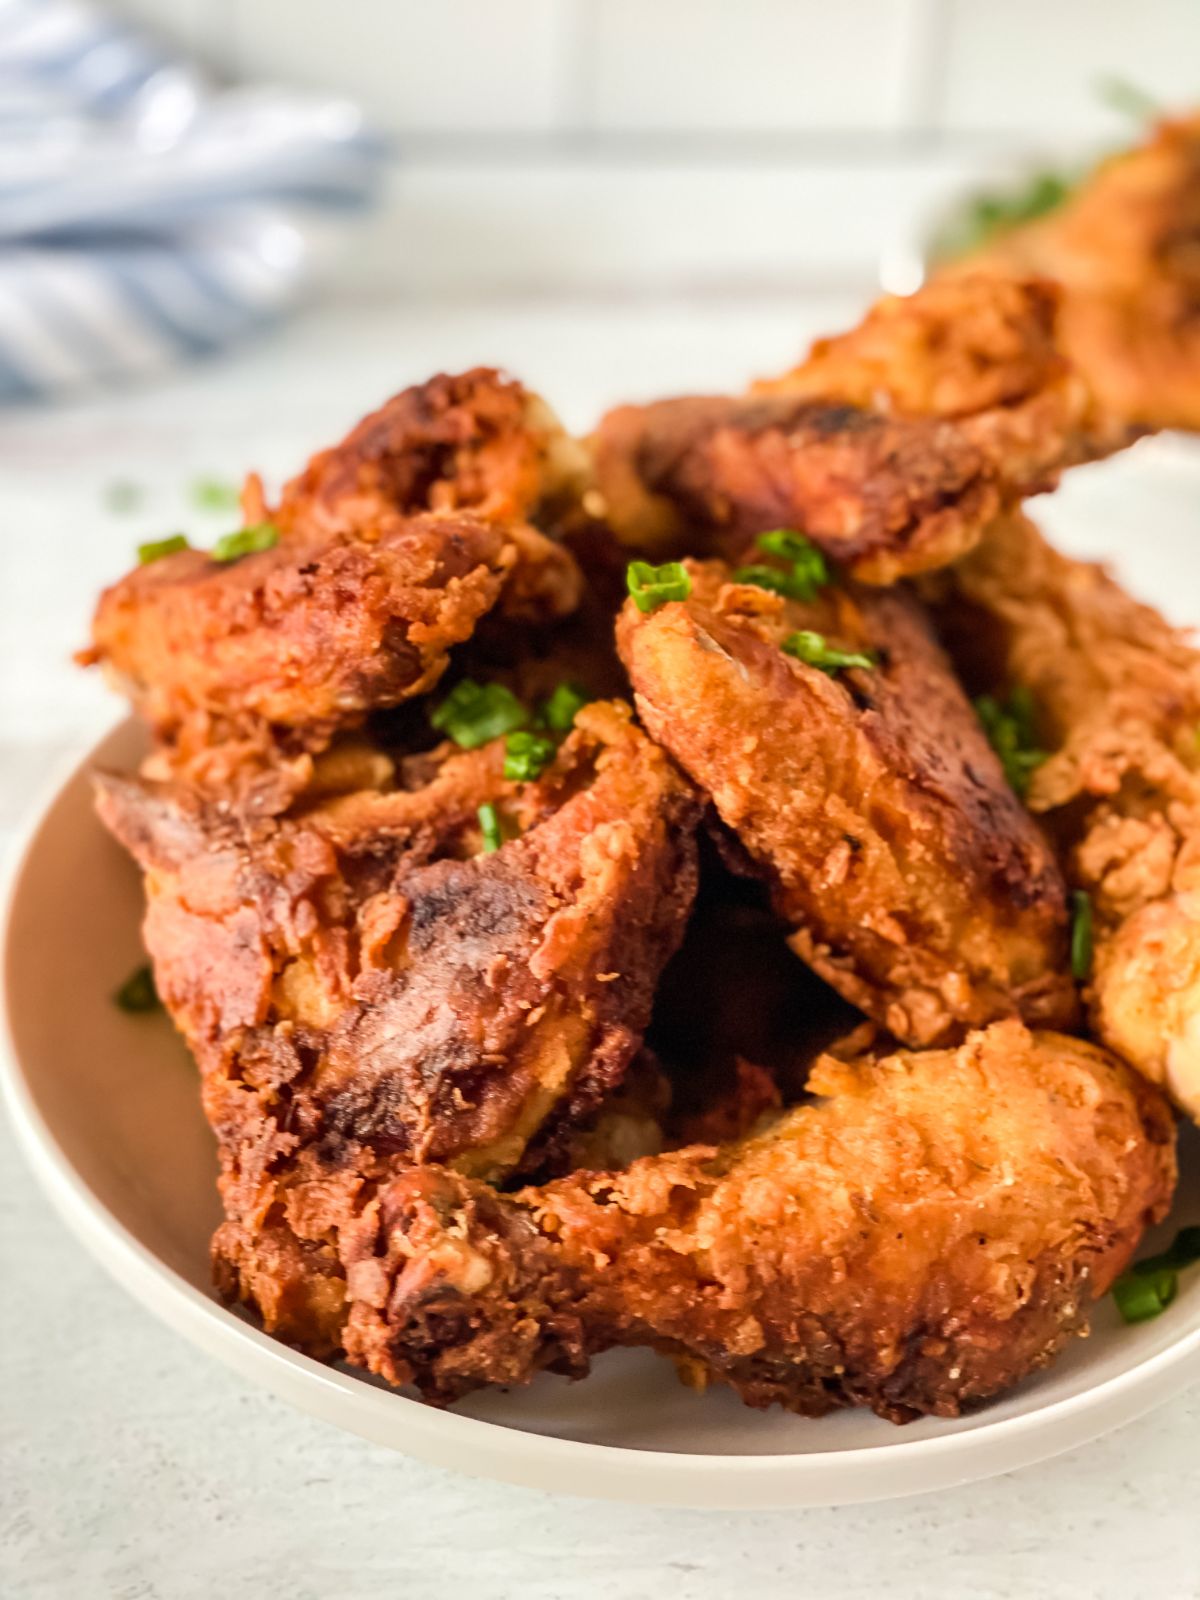 white bowl of fried chicken on table with tile background